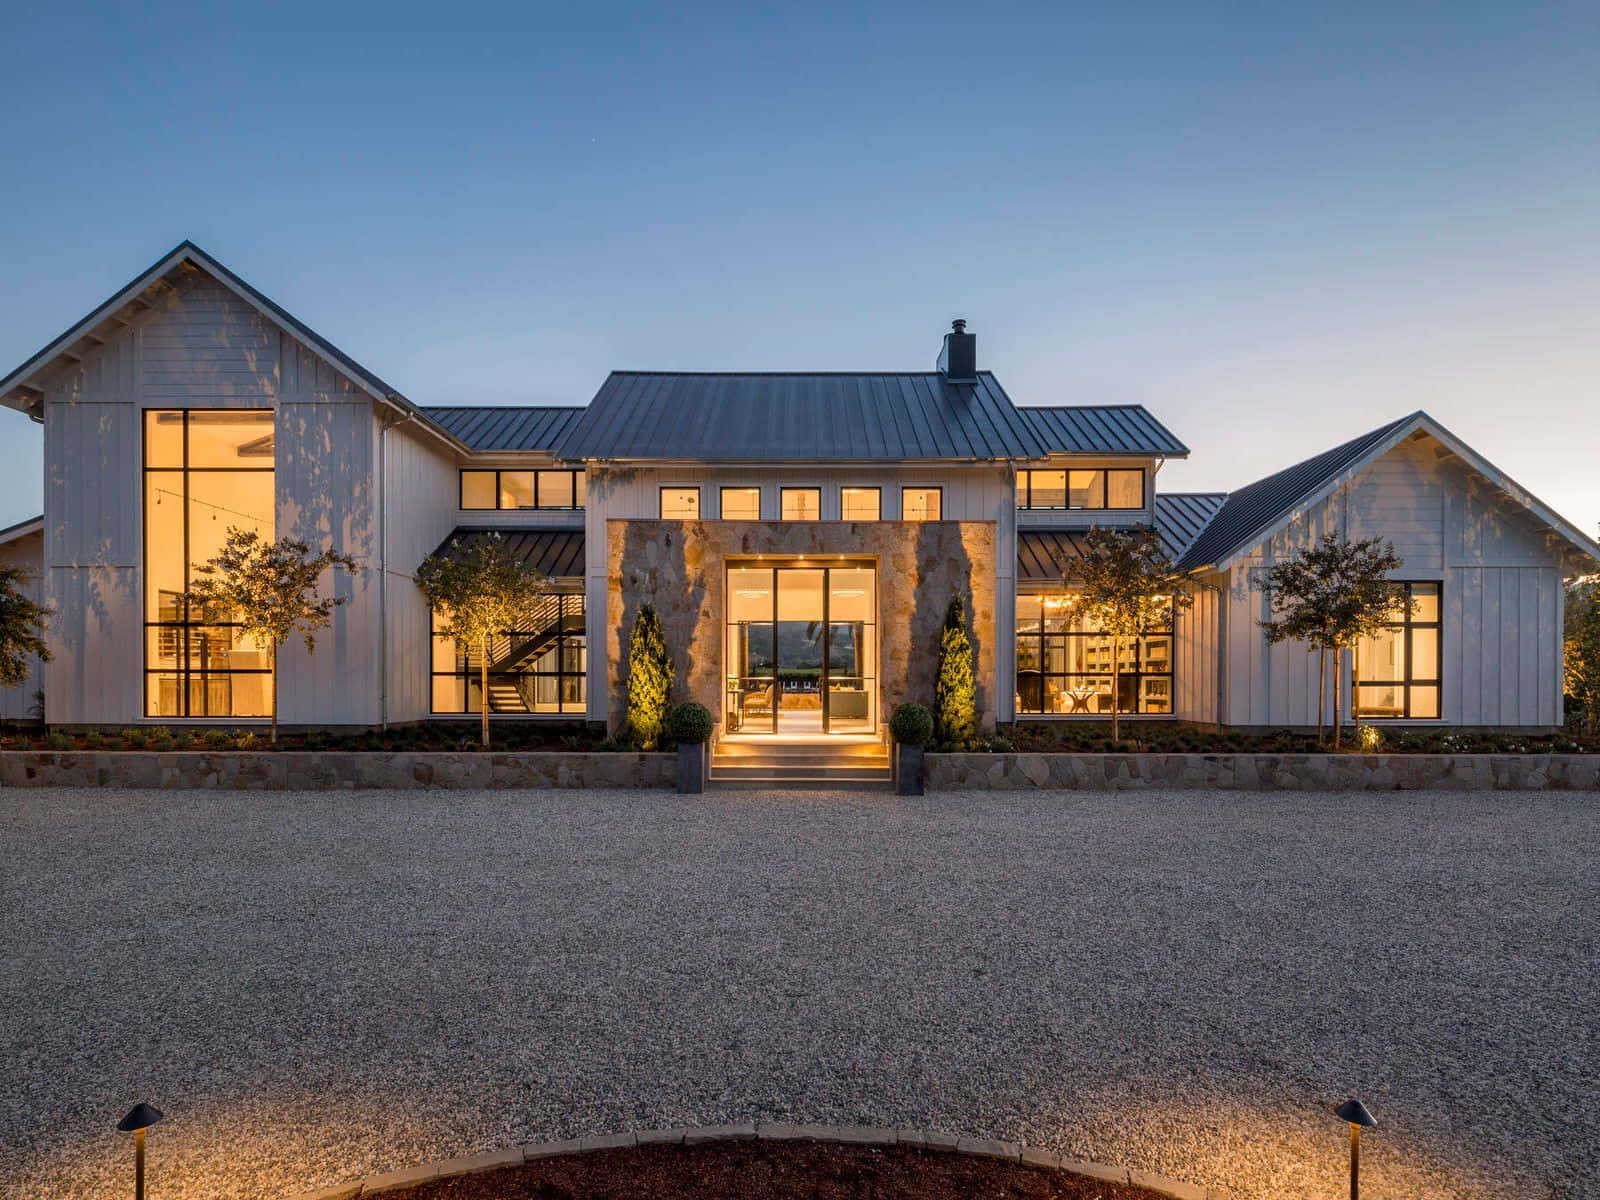 A Modern Farmhouse With A Large Driveway And Lighting